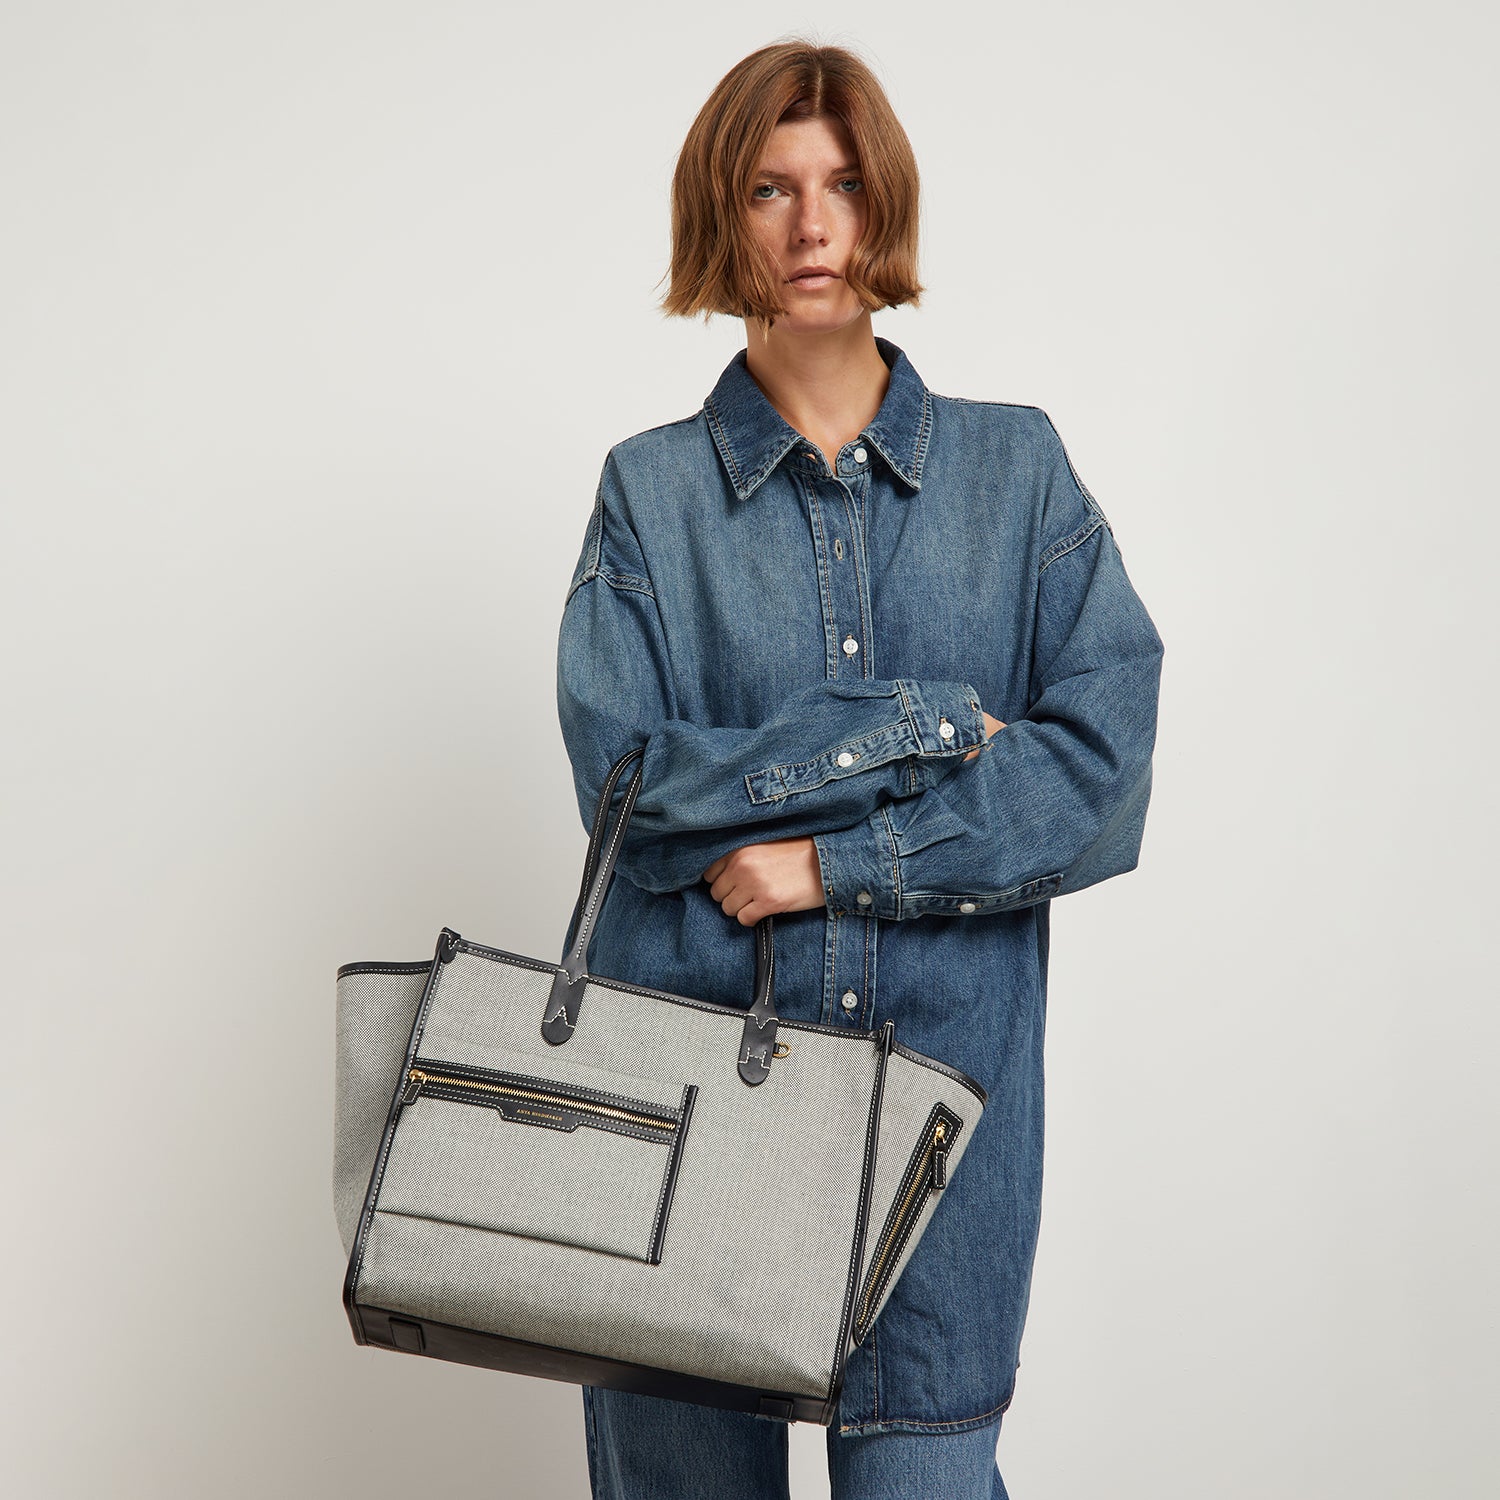 Pocket Tote -

                  
                    Mixed Canvas in Salt and Pepper -
                  

                  Anya Hindmarch UK
